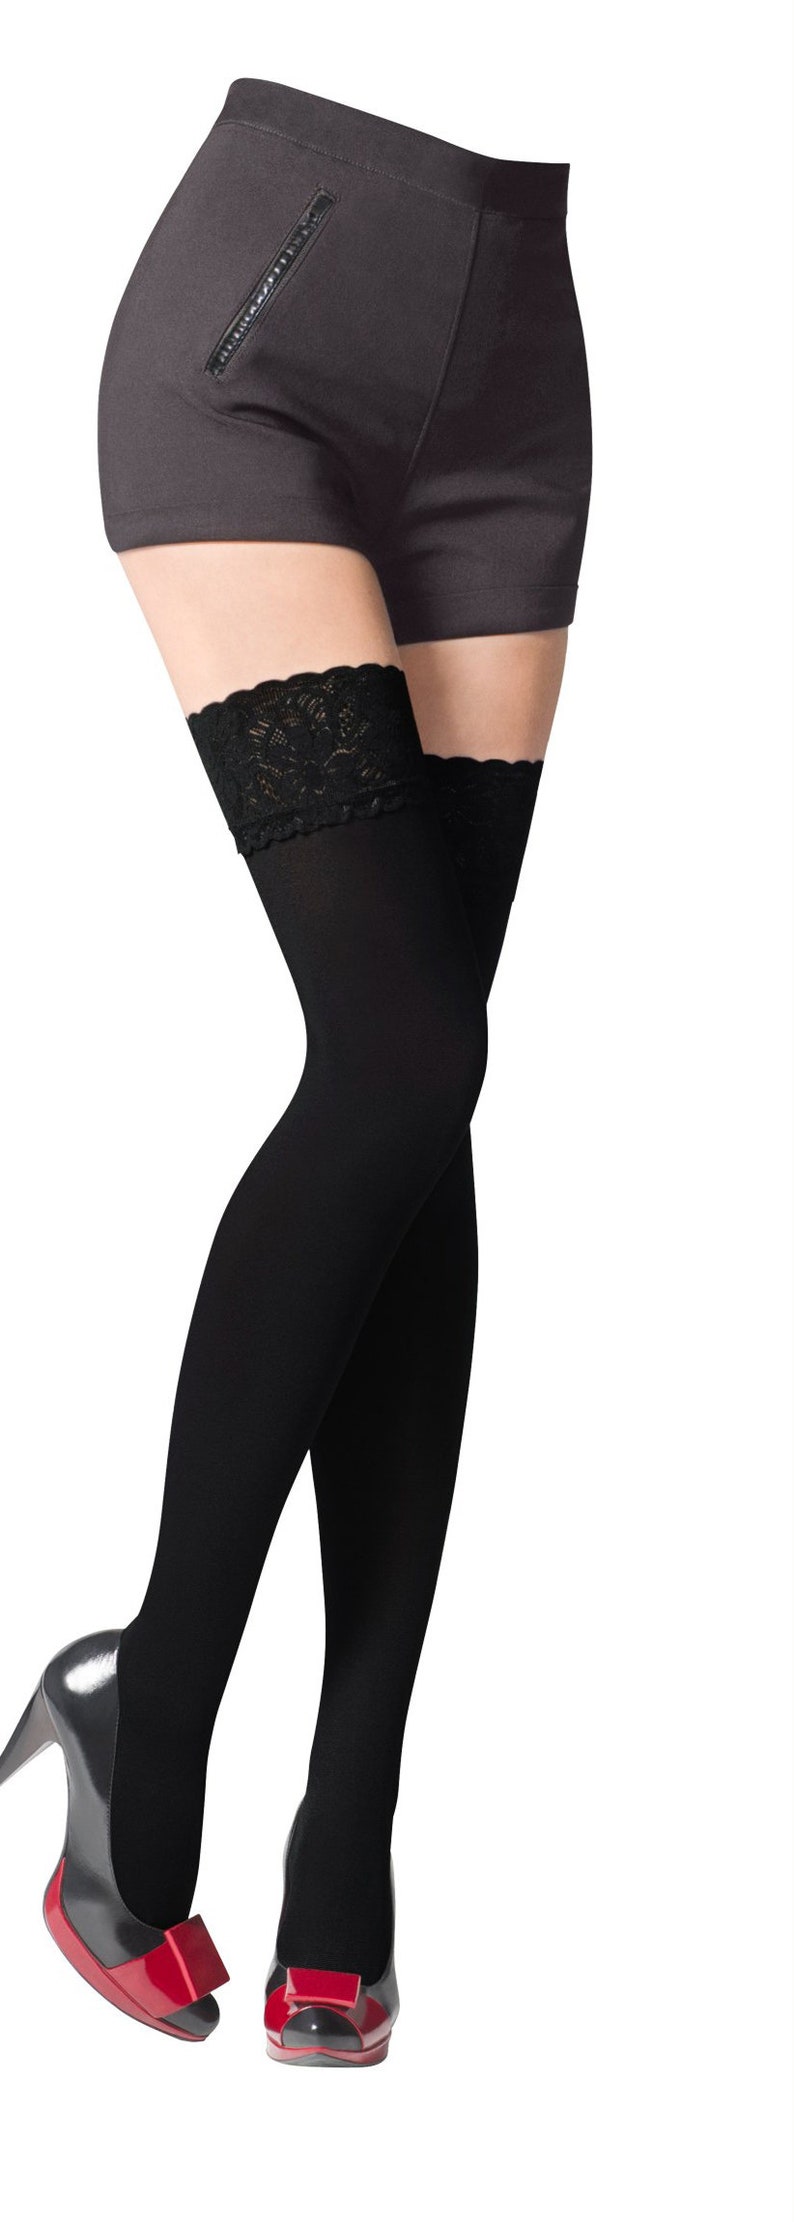 NEW Lace Top 80 Denier Sheer Hold-Ups Stockings by Sentelegri ,9 Various Colours Sizes S-XL Black